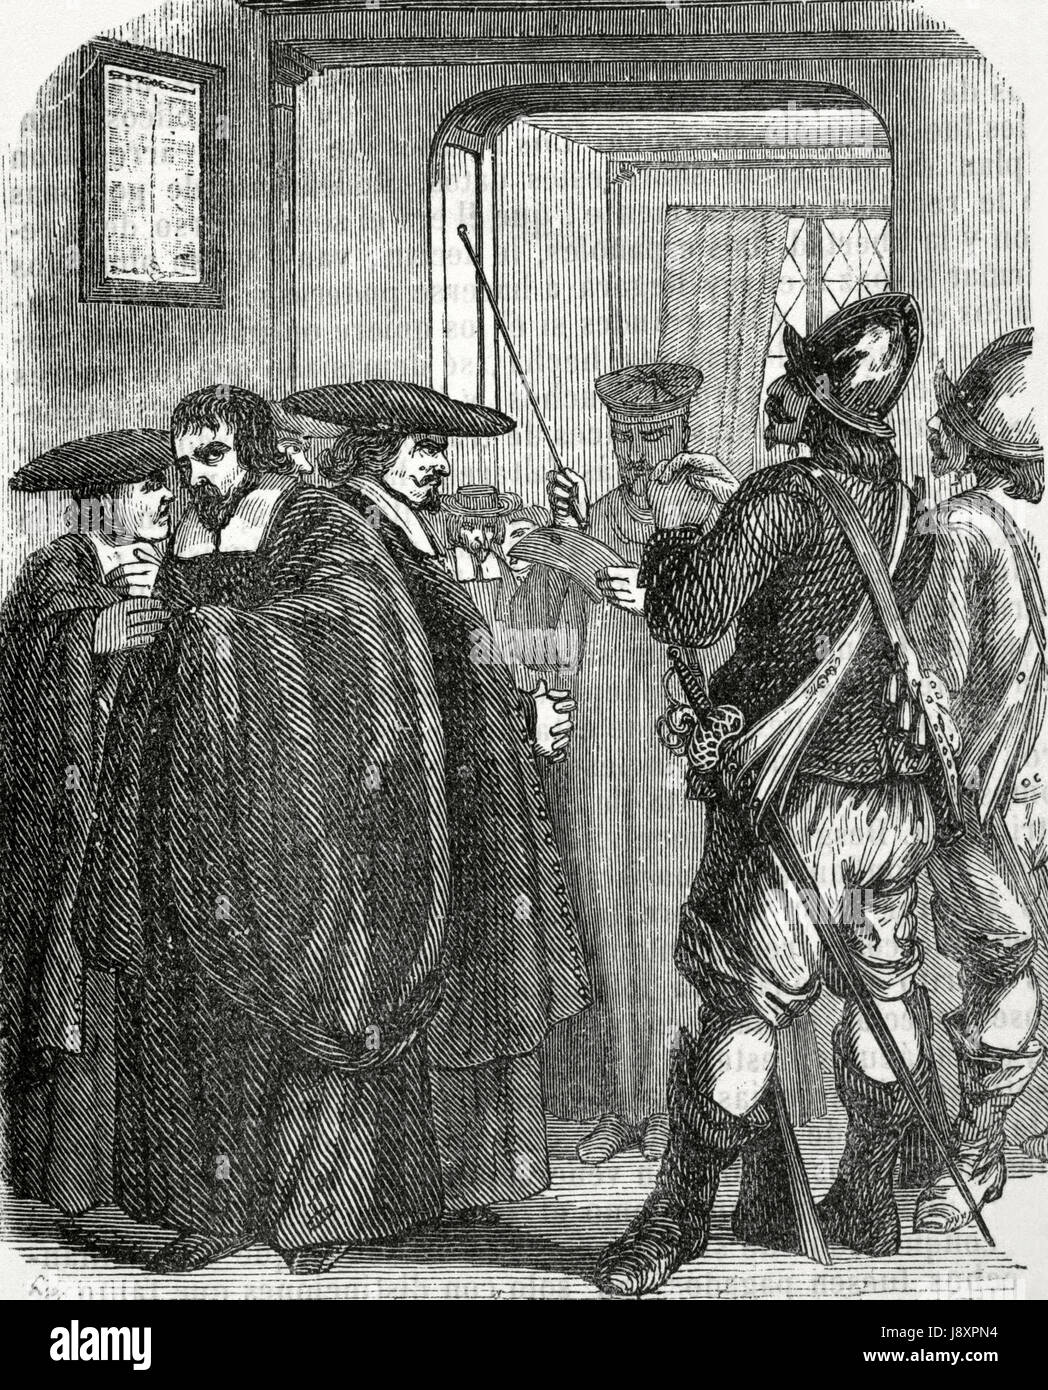 Arrest of the Jesuits accused of inspiring Jean Chatel (1575-1594) to assassinate the king Henry IV of France (1553-1610) on 27th, December 1594. Engraving by Dupre, 1851. Stock Photo